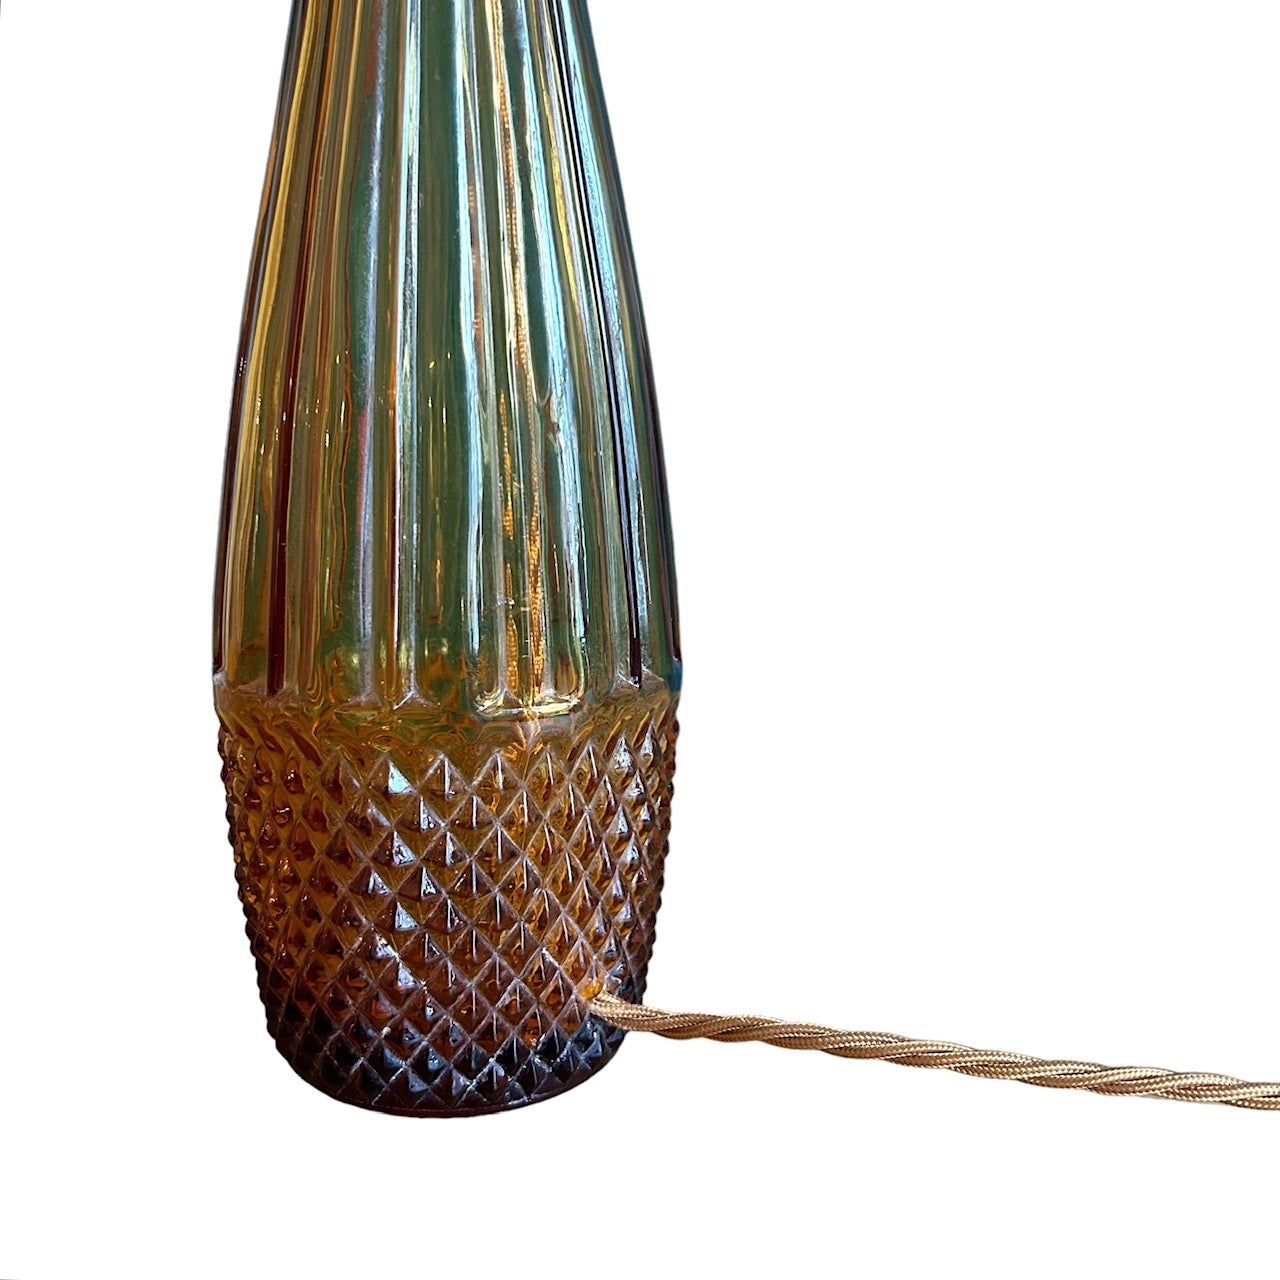 Glass cone lamp in amber